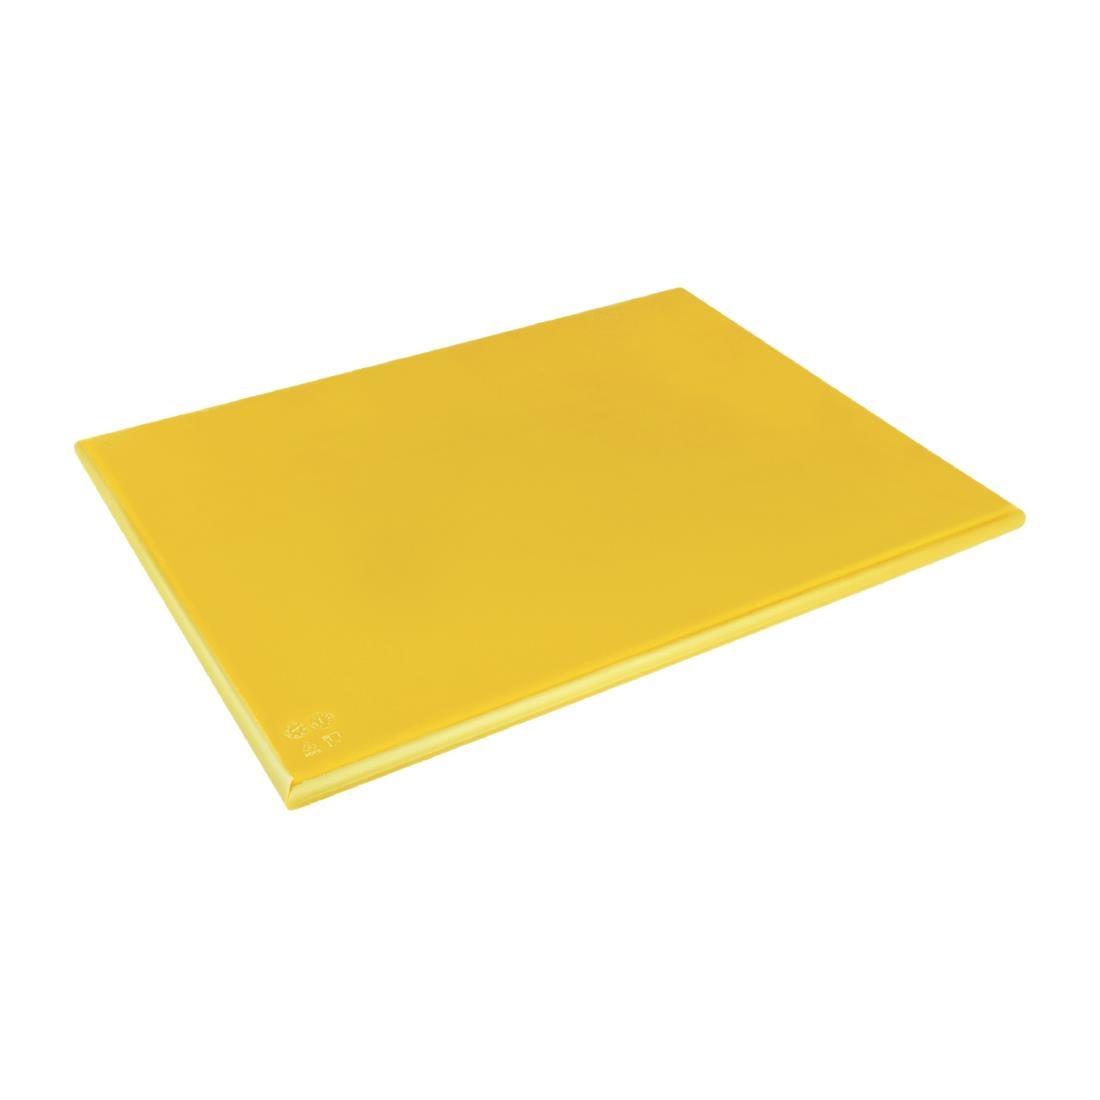 Hygiplas Extra Thick Low Density Yellow Chopping Board Large - HC884  - 1